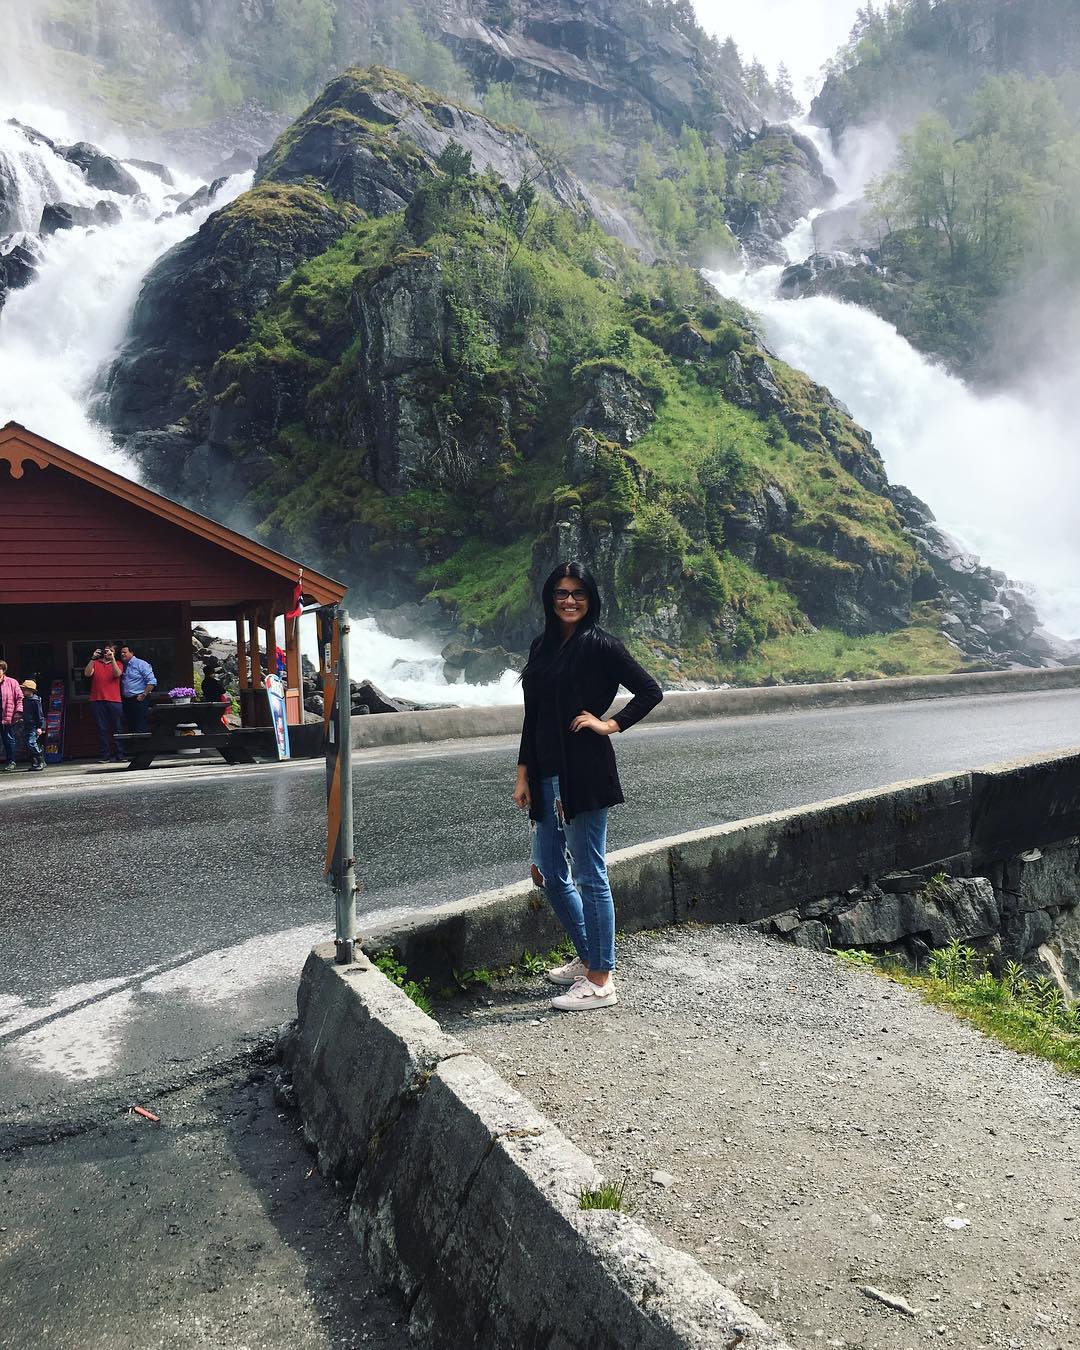 If you are not obsessed with your life , change it #norway #traveling #travelphotography #mountains #lovemylife #lavidaloca #vivirlavida #lithuaniangirl  #cryunderwater